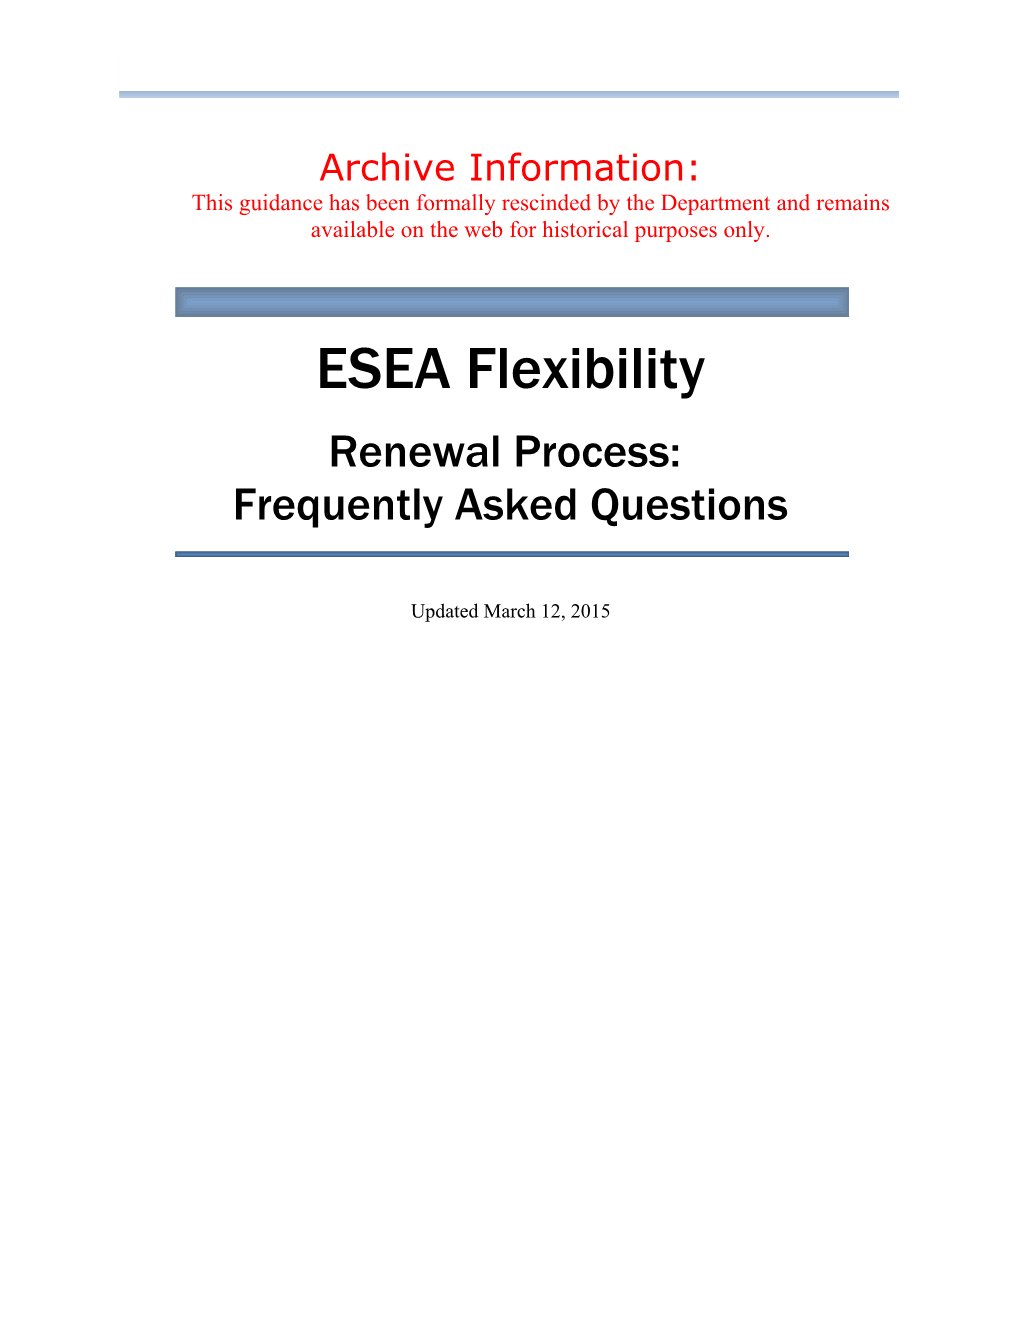 Archived: Frequently Asked Questions - ESEA Flexibility (MS Word)